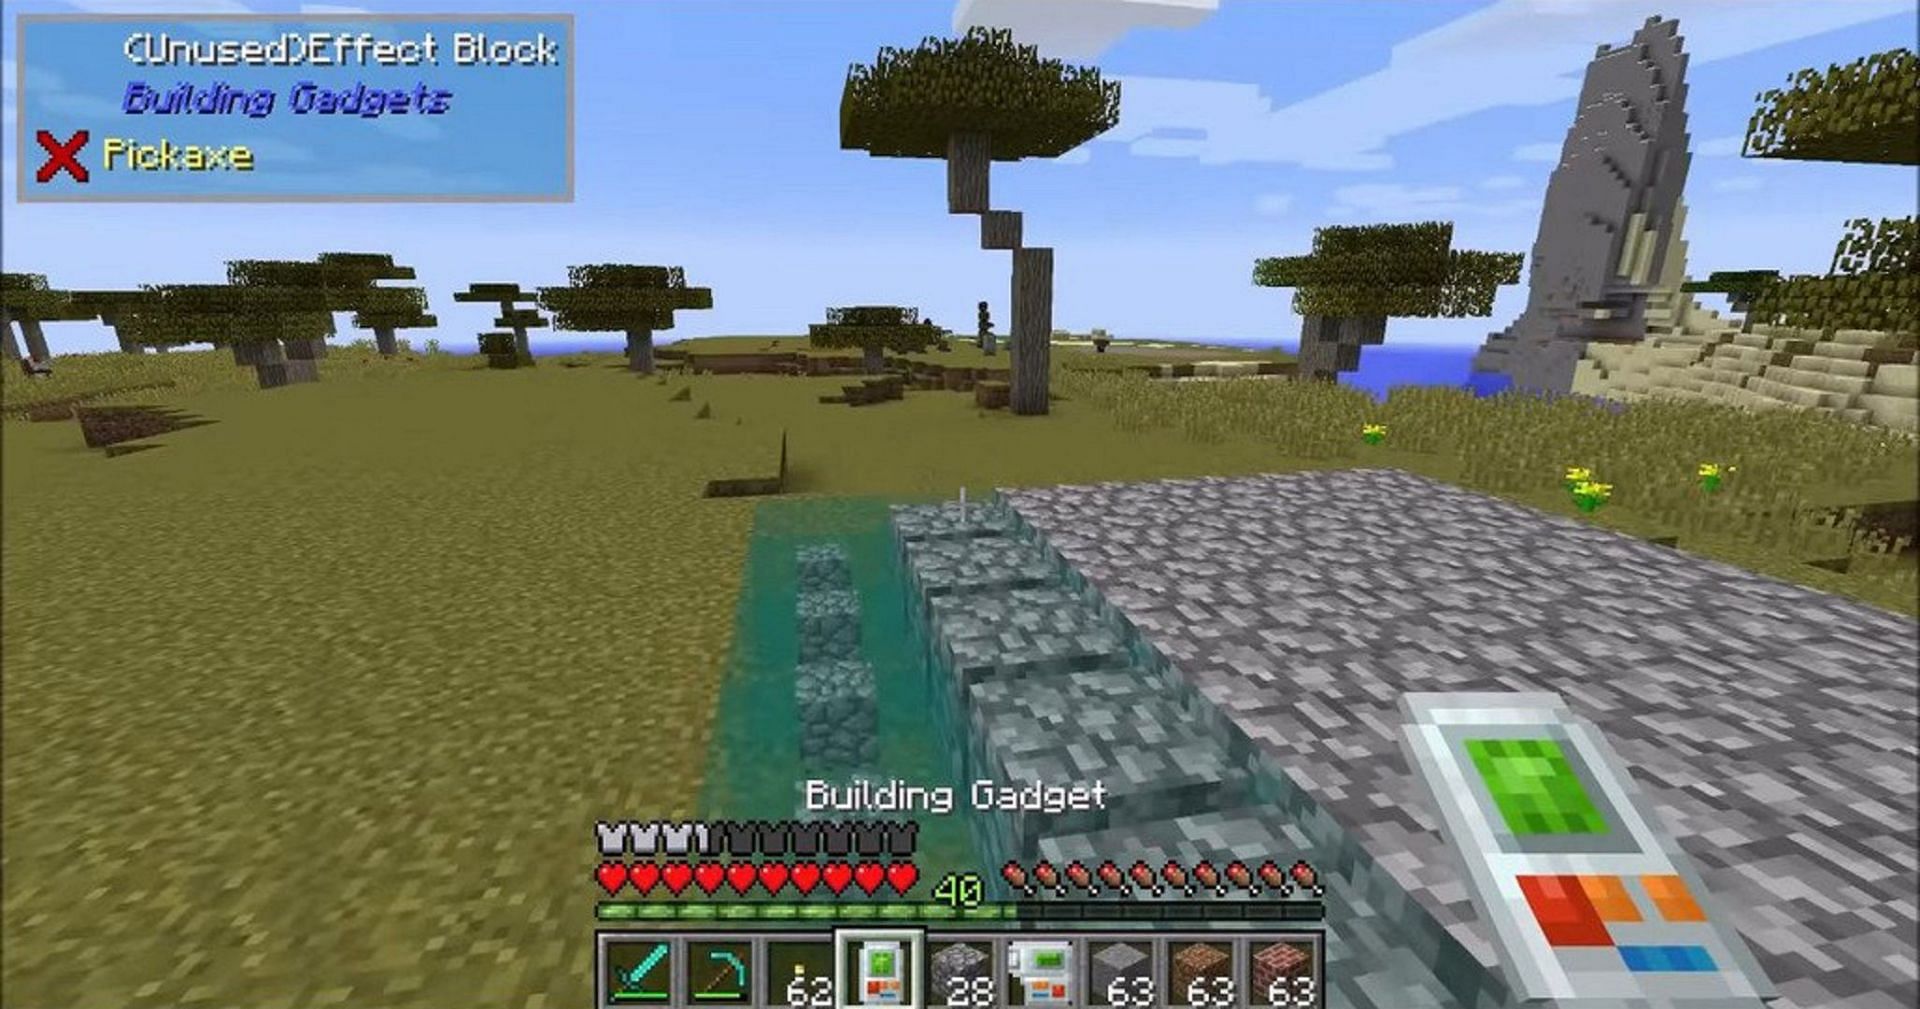 A player places a row of blocks using Building Gadgets (Image via Direwolf20/9Minecraft)